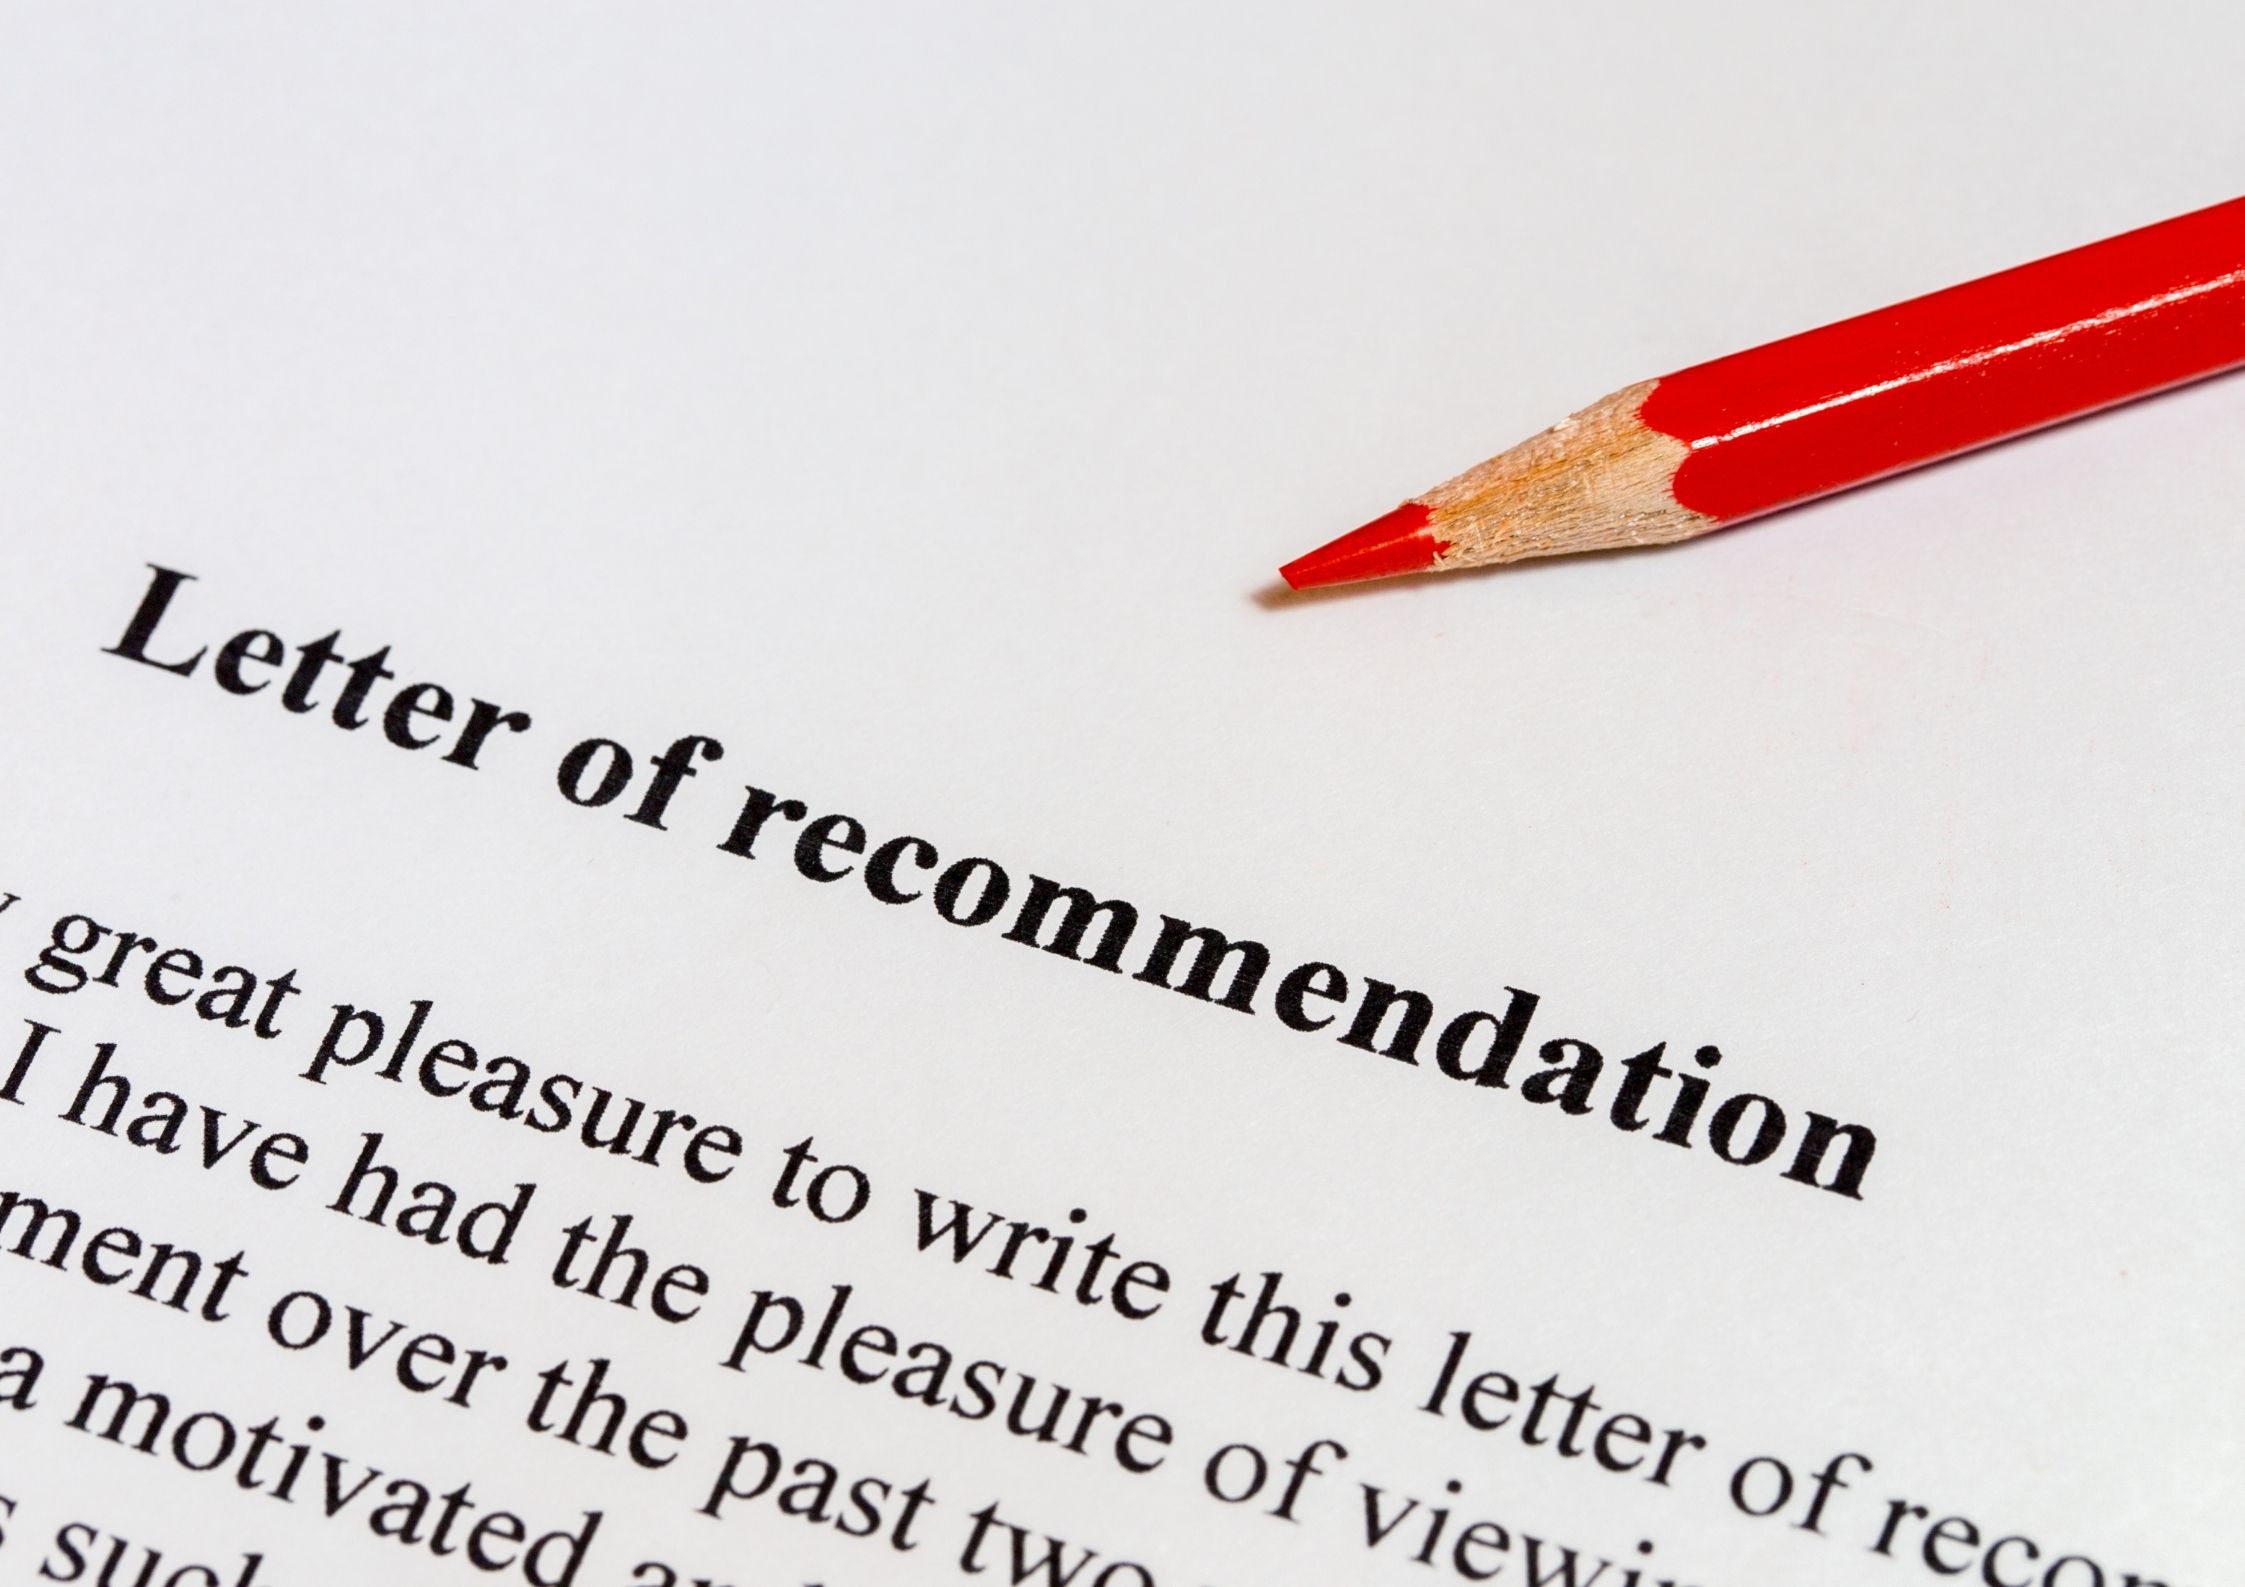 Decoding the Letter of Recommendation…